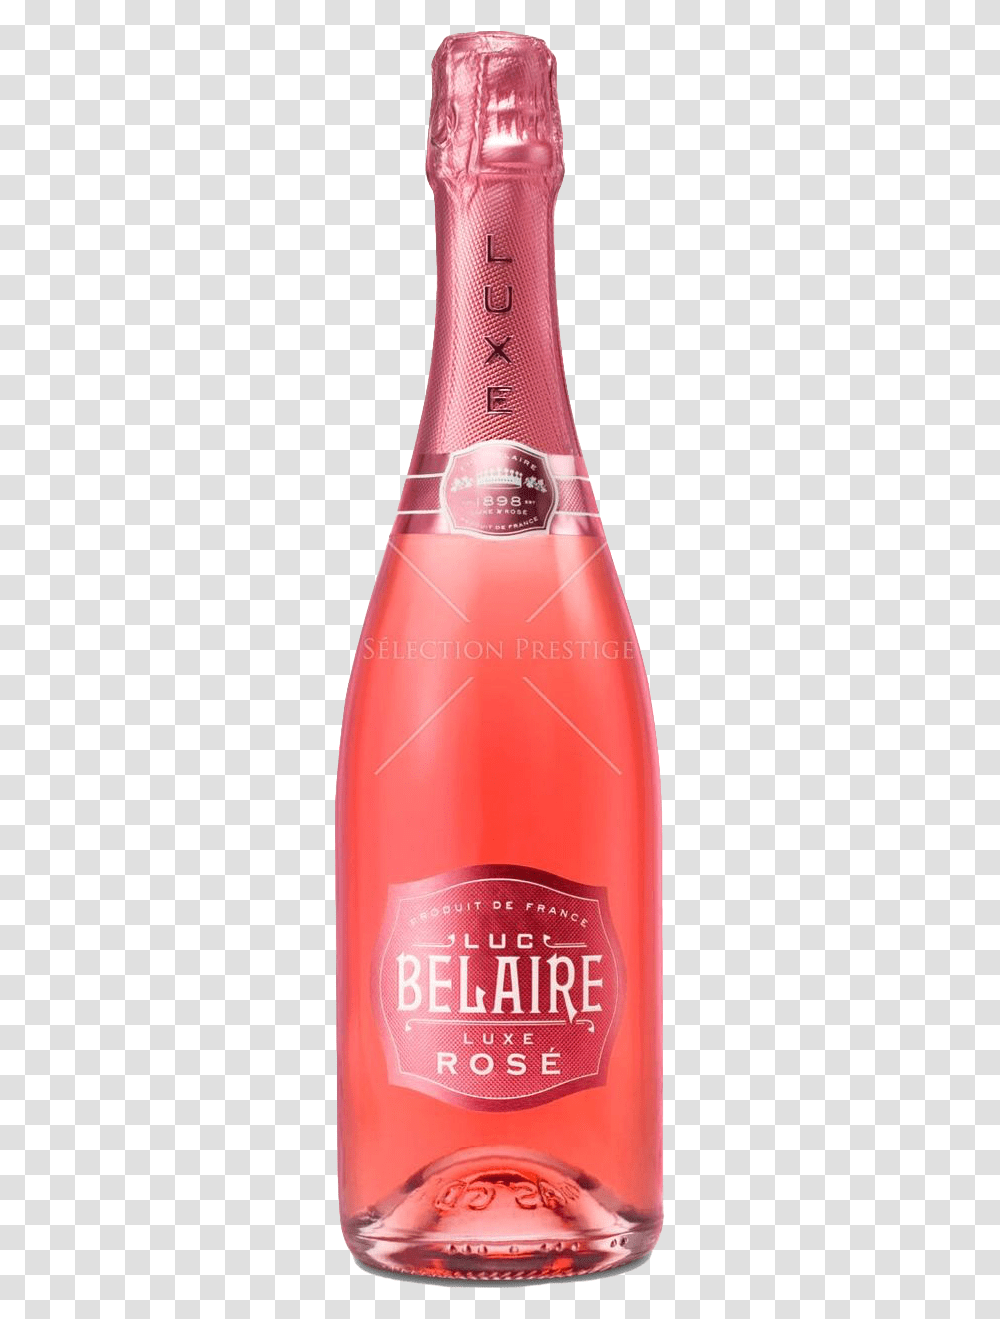 Luc Belaire Luxe Rose, Bottle, Ketchup, Food, Label Transparent Png